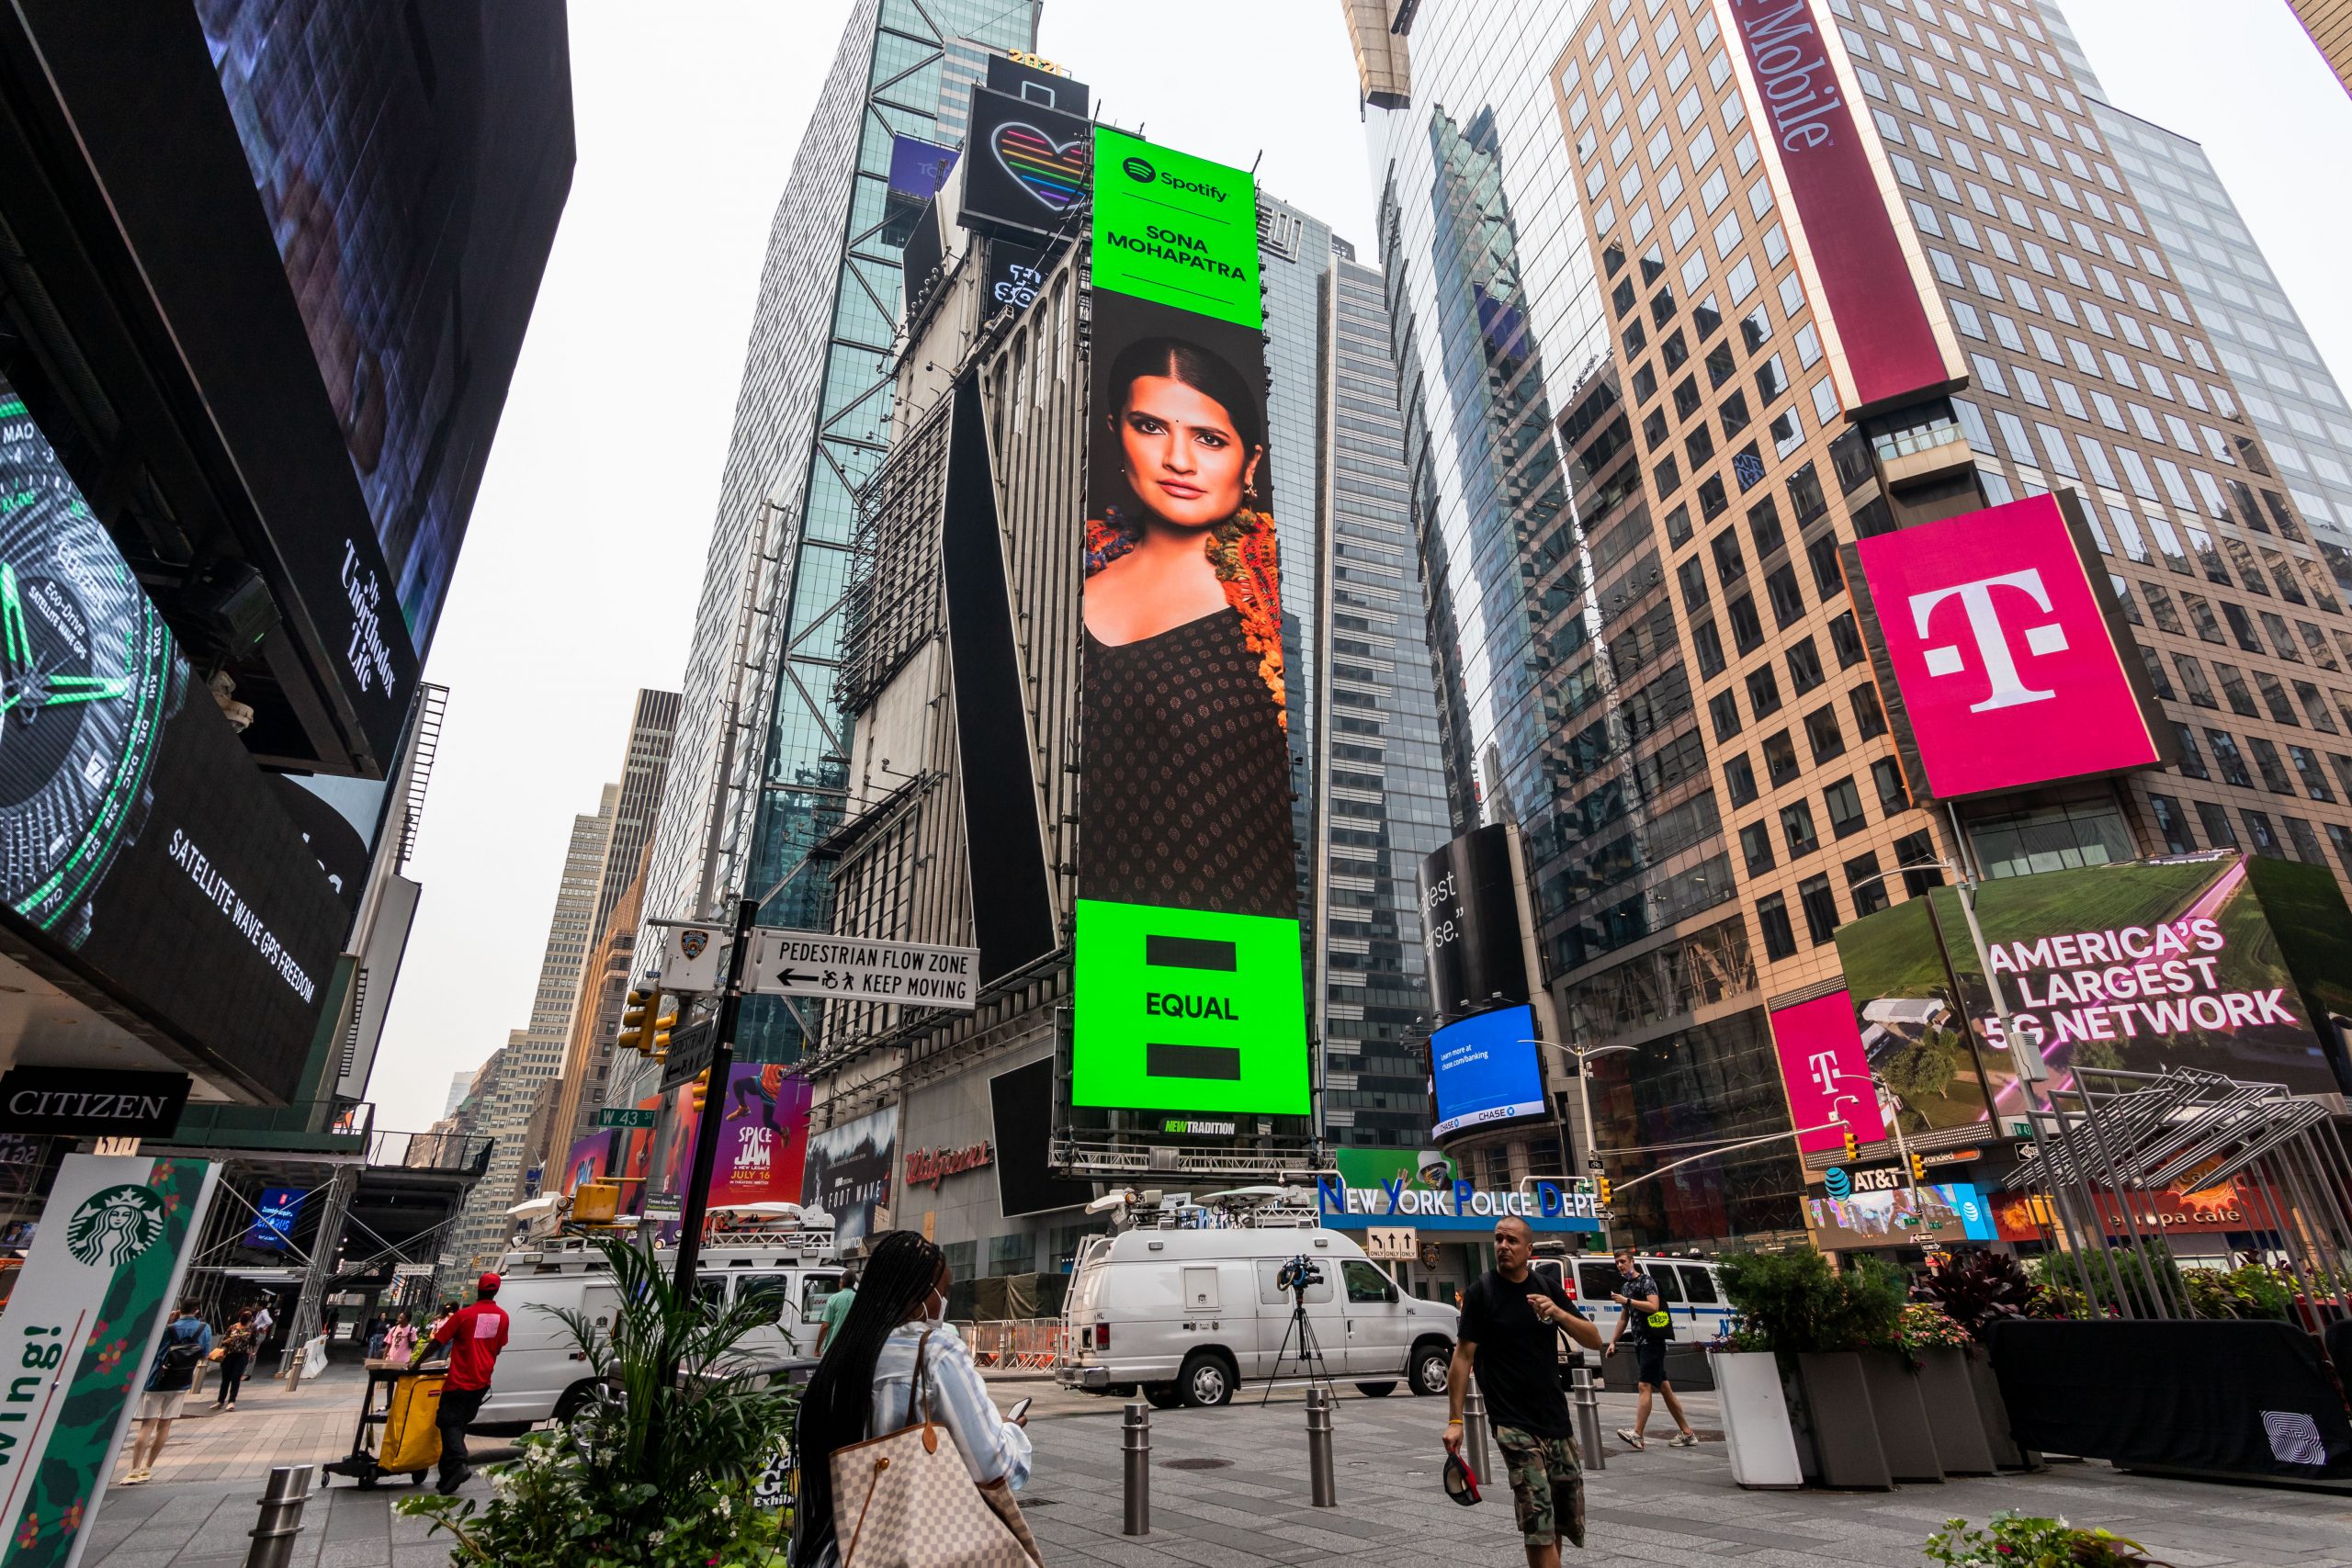 Singer Sona Mohapatra makes her Times Square Billboard debut